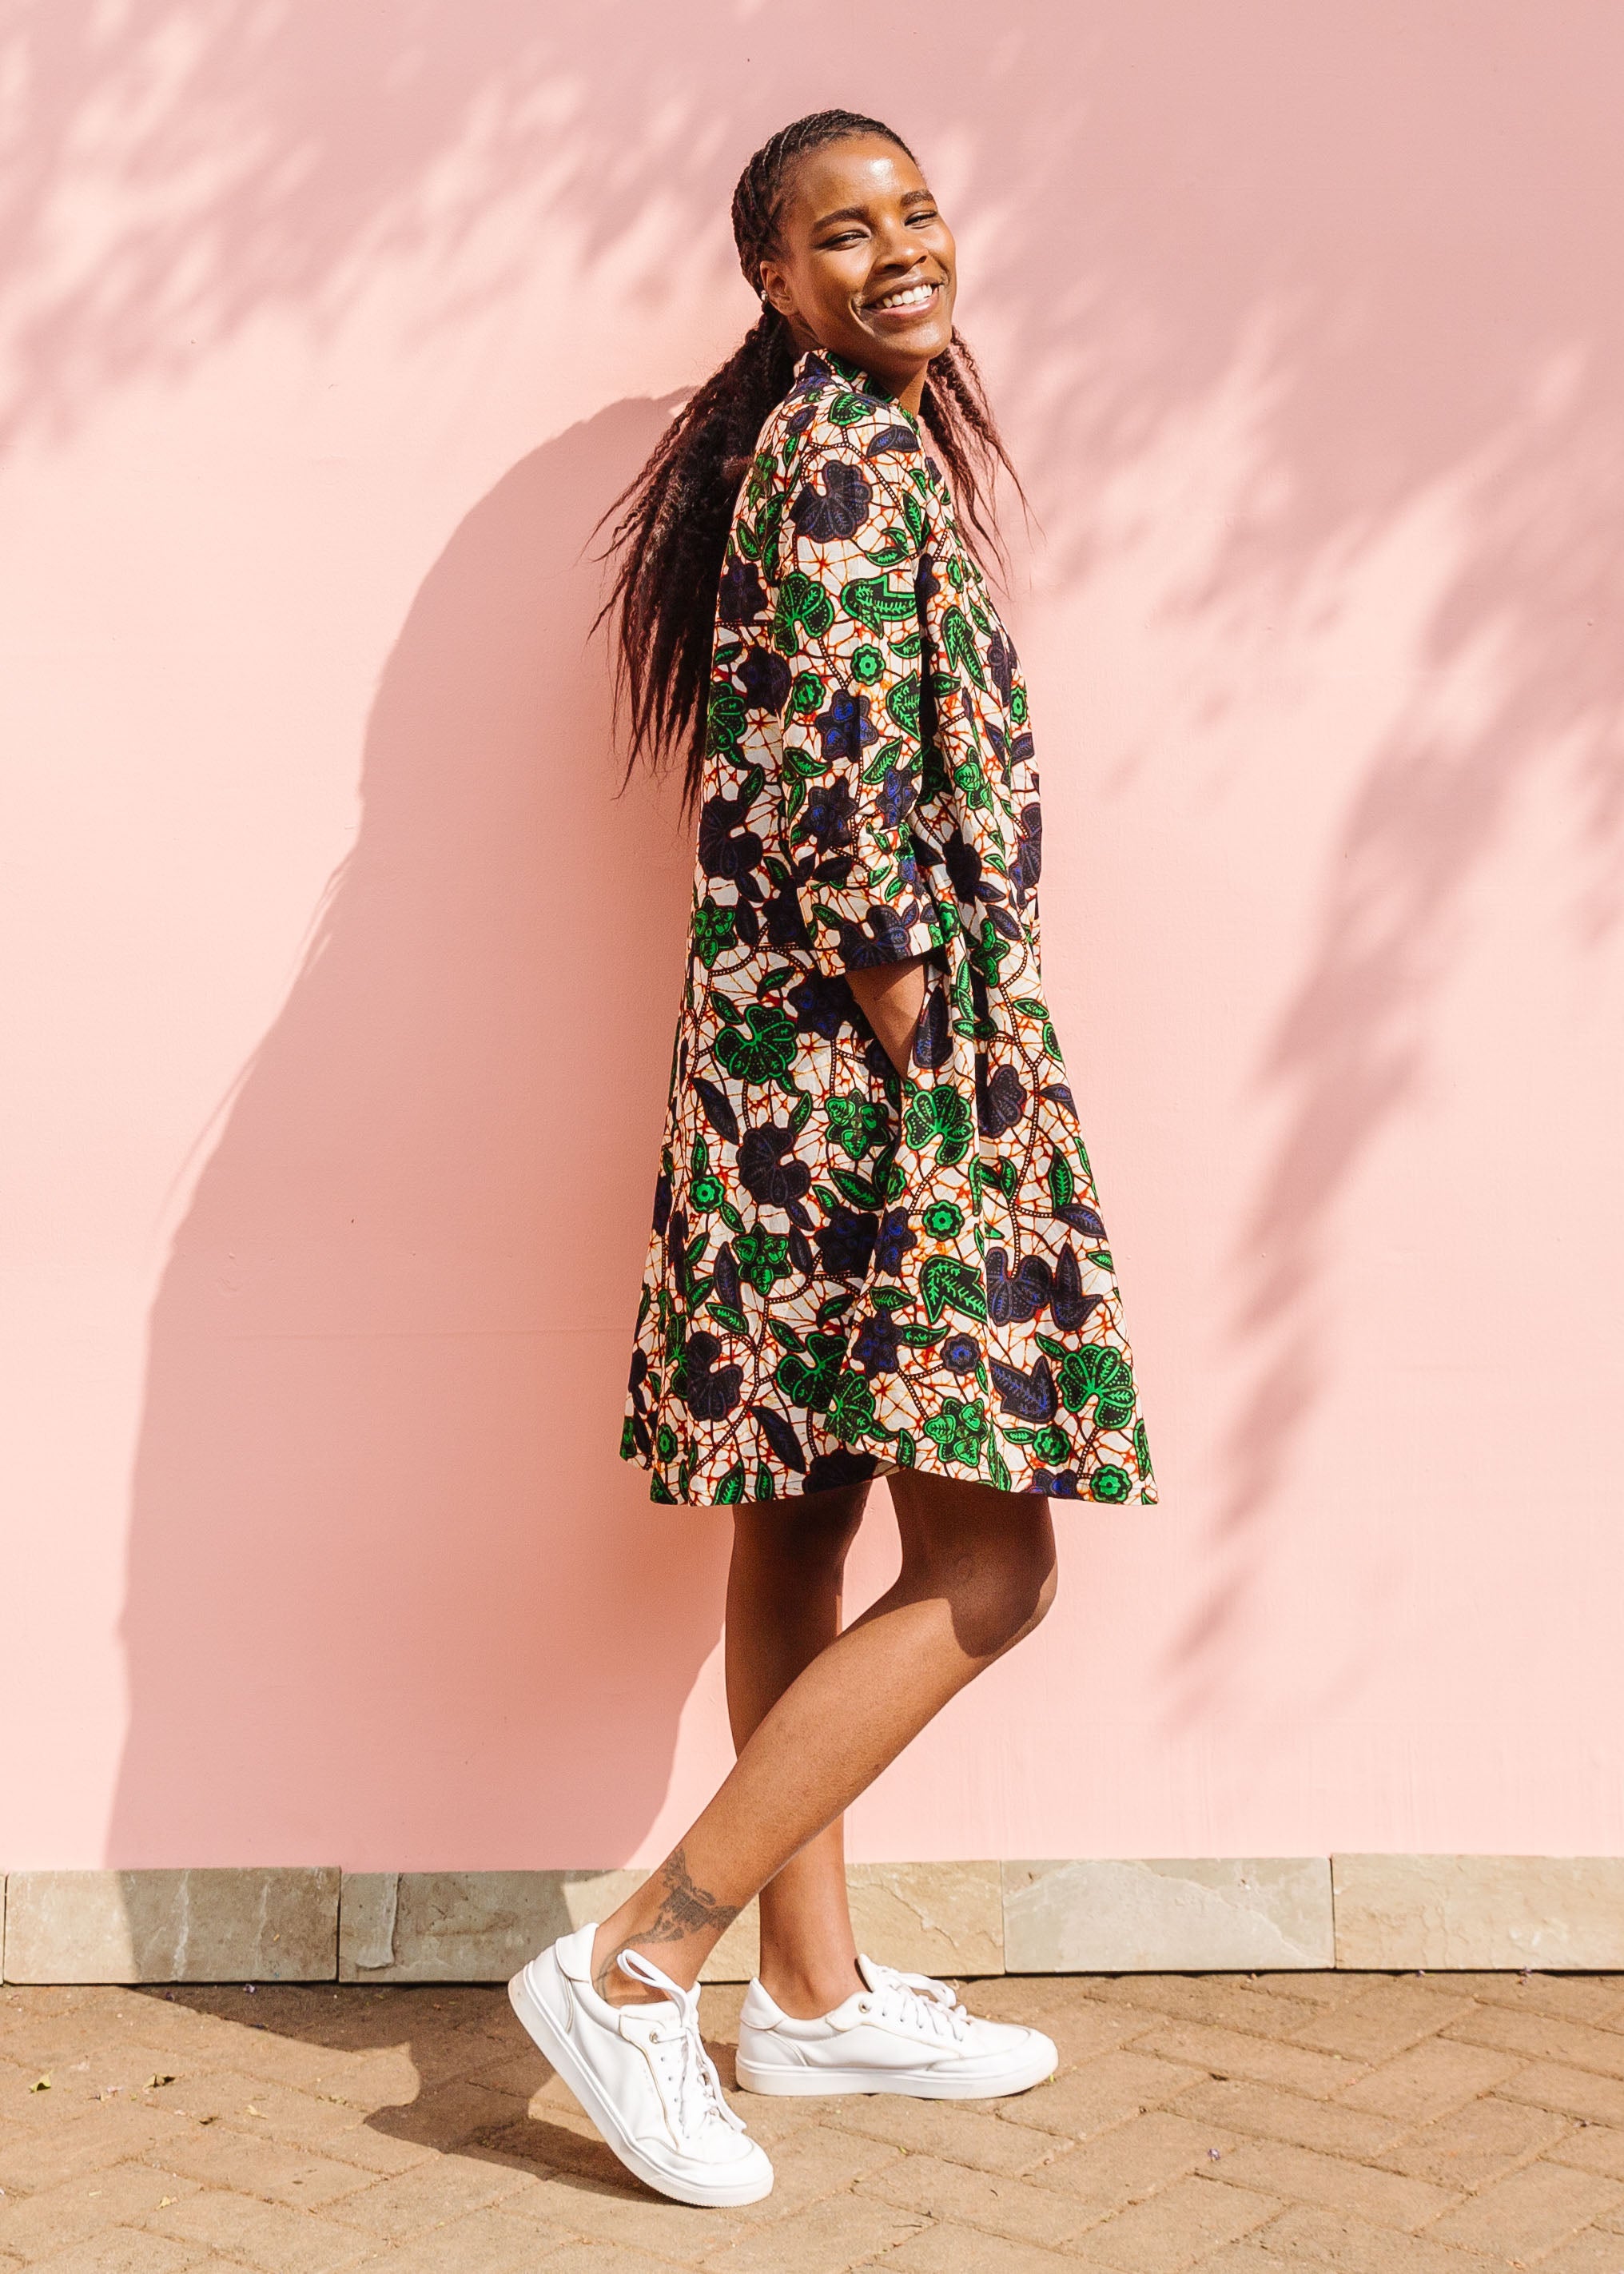 Model wearing brown dress with green and blue vine print.